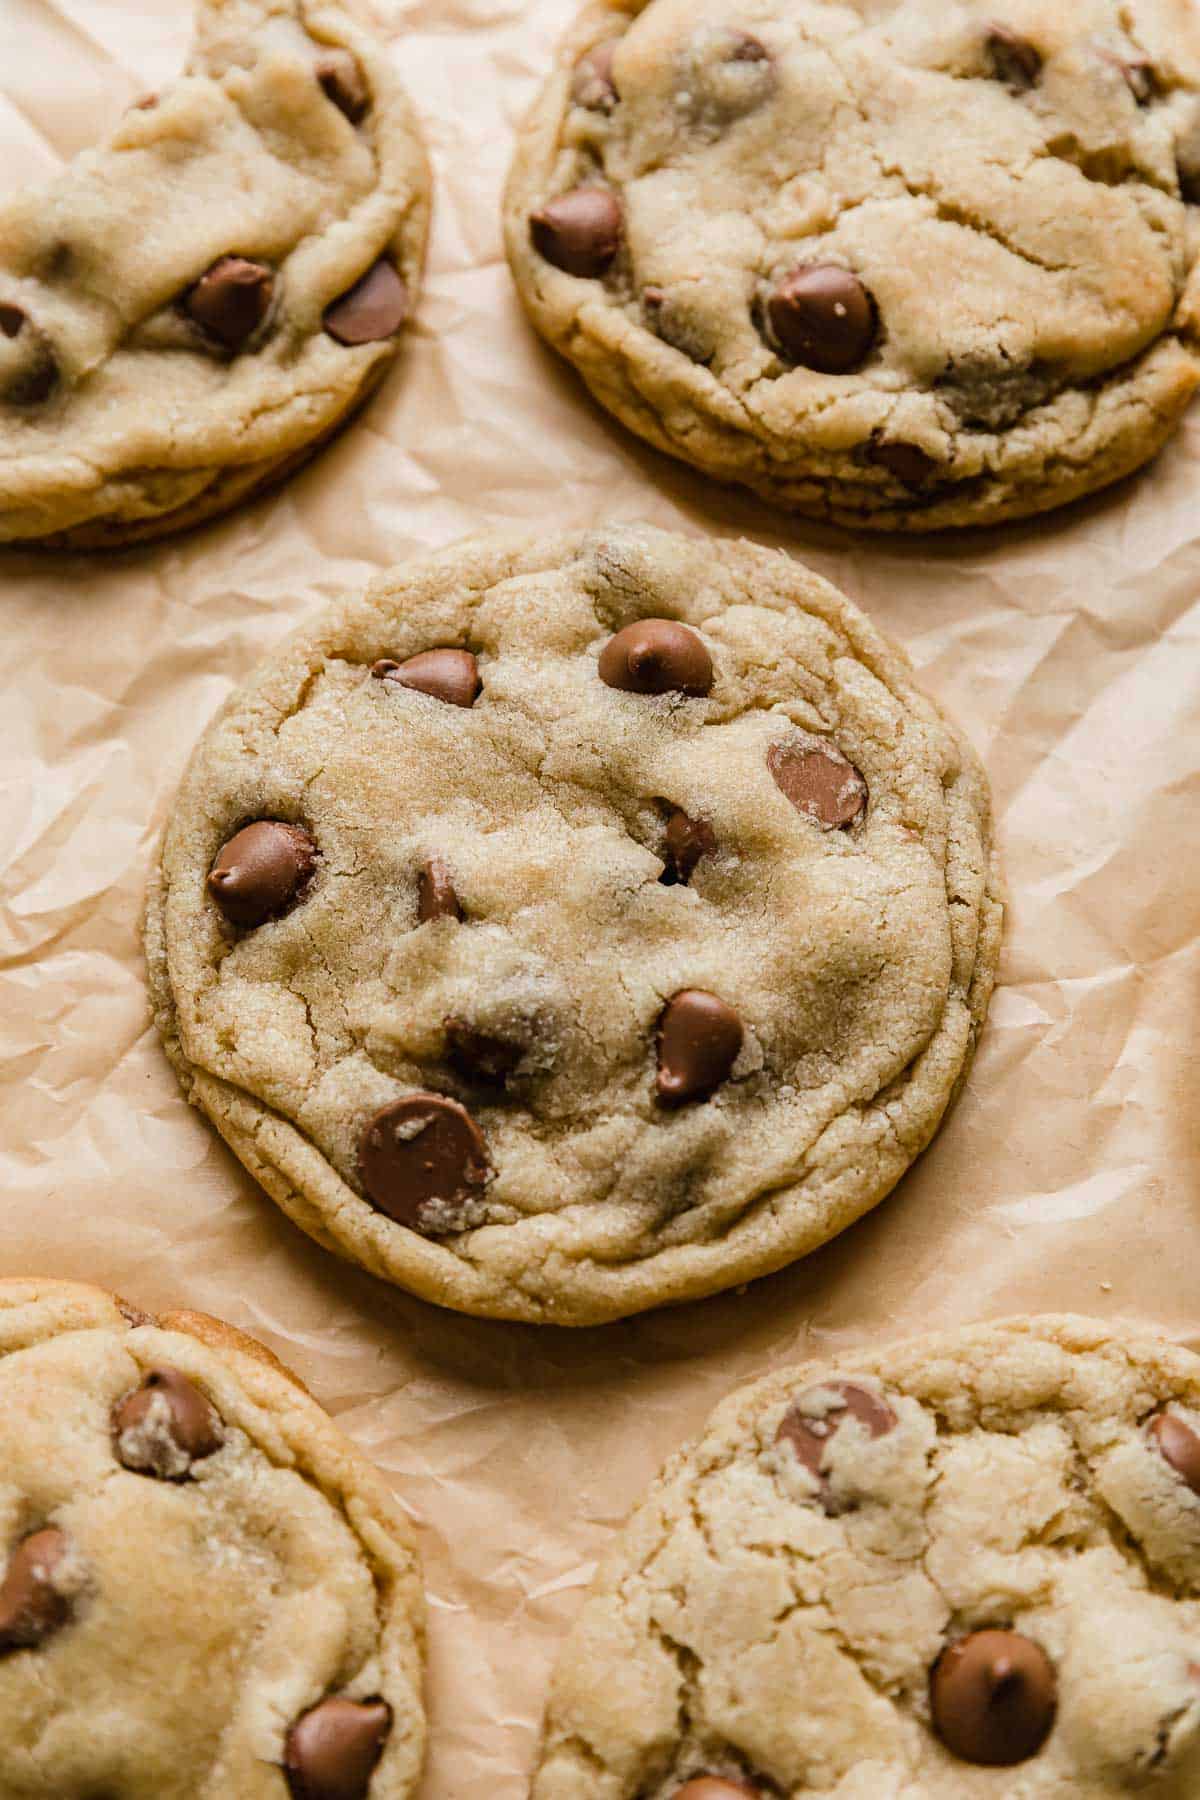 A Crumbl Chocolate Chip Cookie on a tan colored parchment paper.